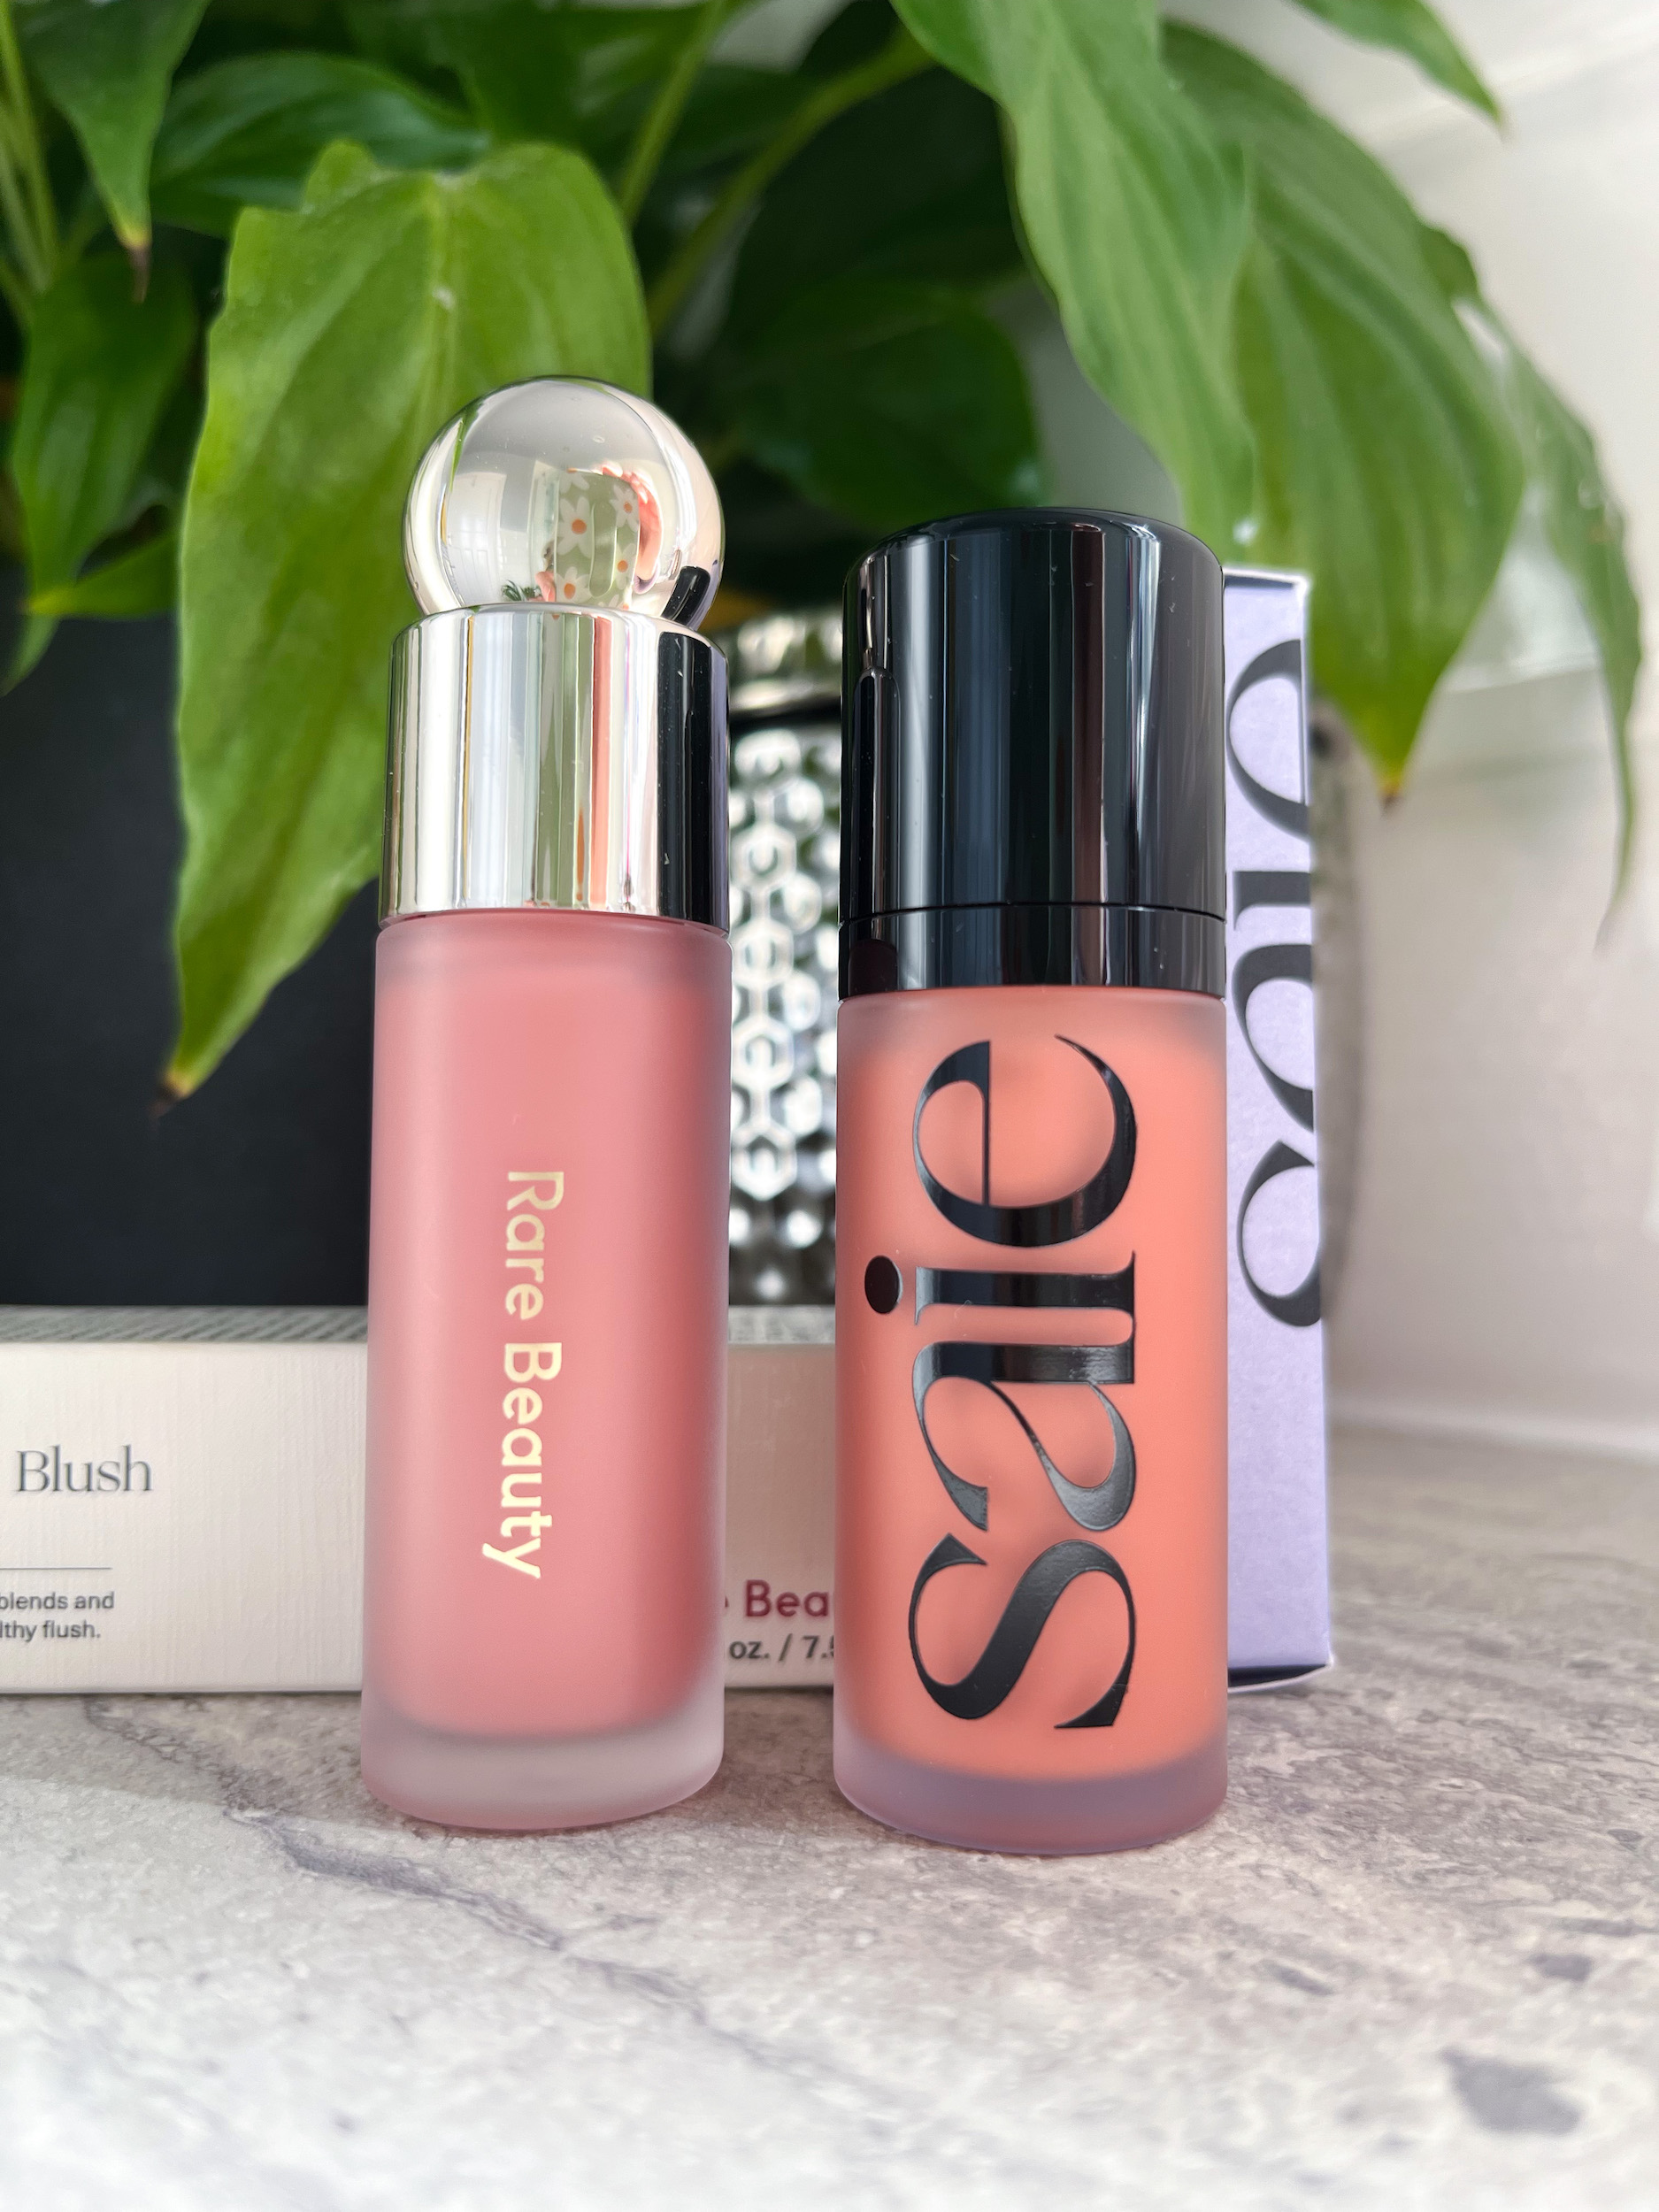 Battle of the Blushes: Rare Beauty vs Saie - The Summer Study